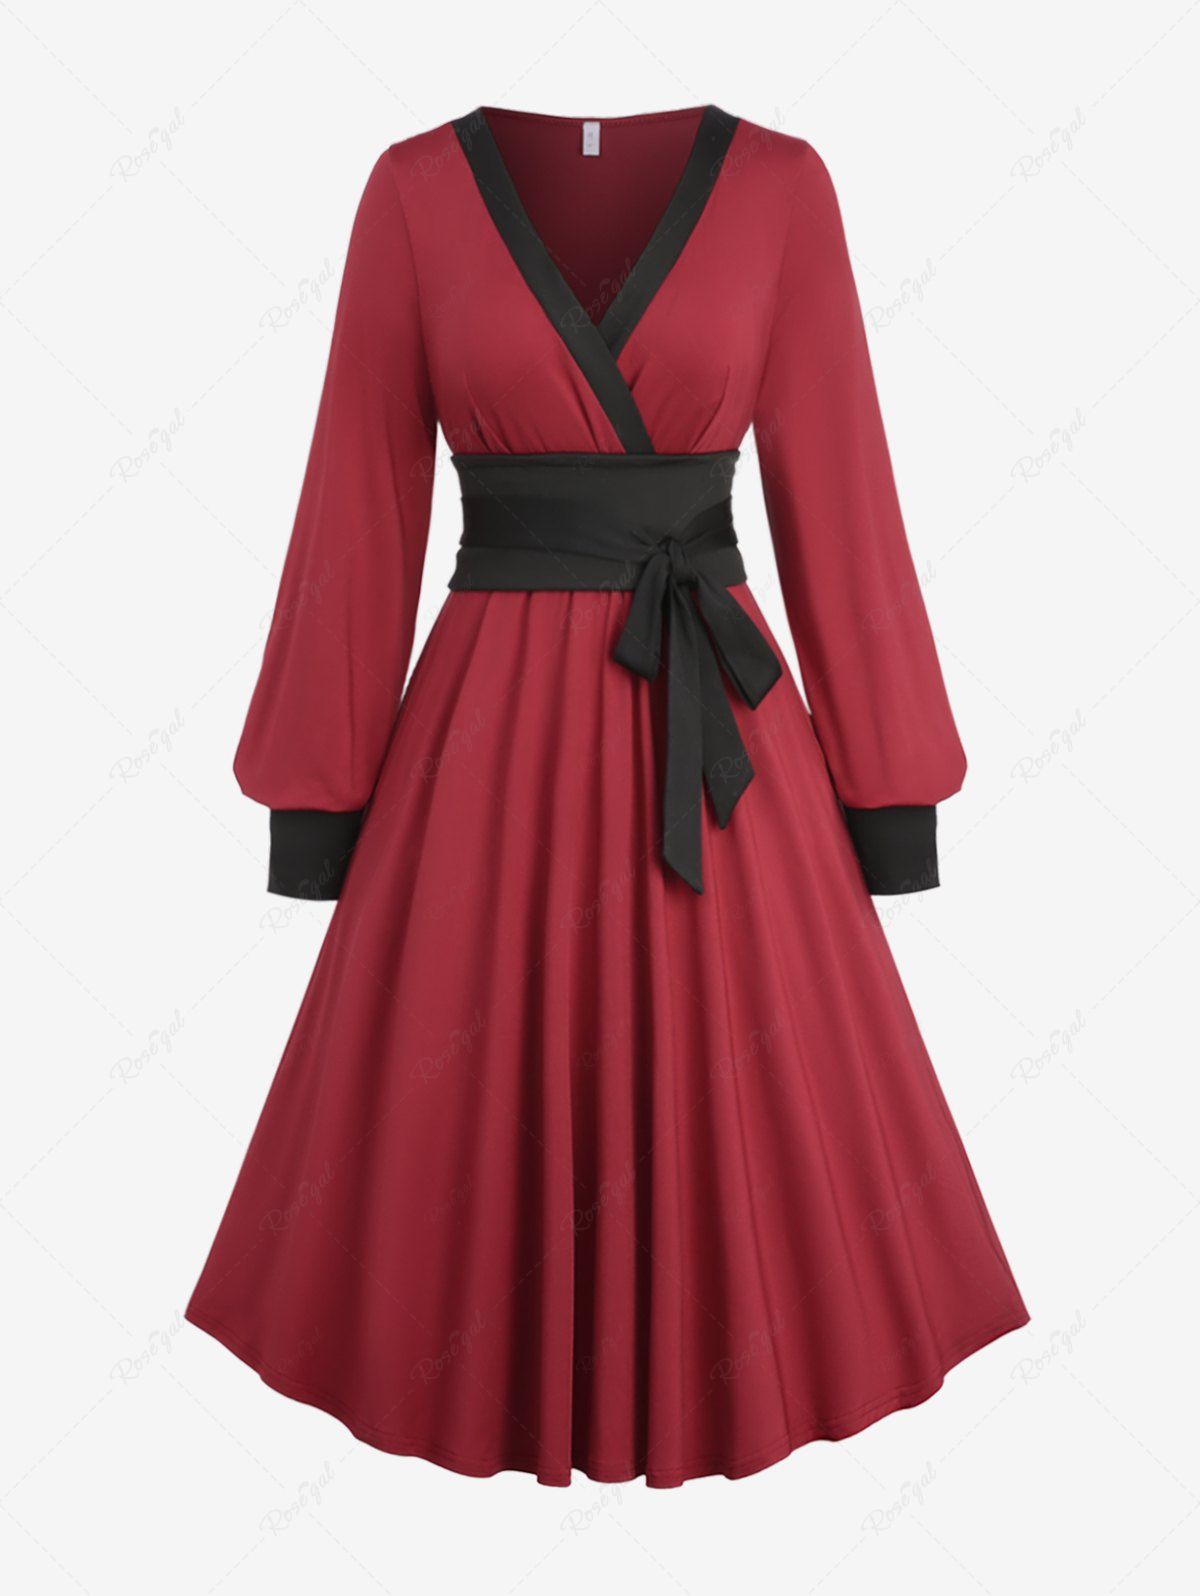 Outfits Plus Size Surplice Ruffles Bishop Sleeve A Line Chinese Style Dress with Bowknot Tie Belt  